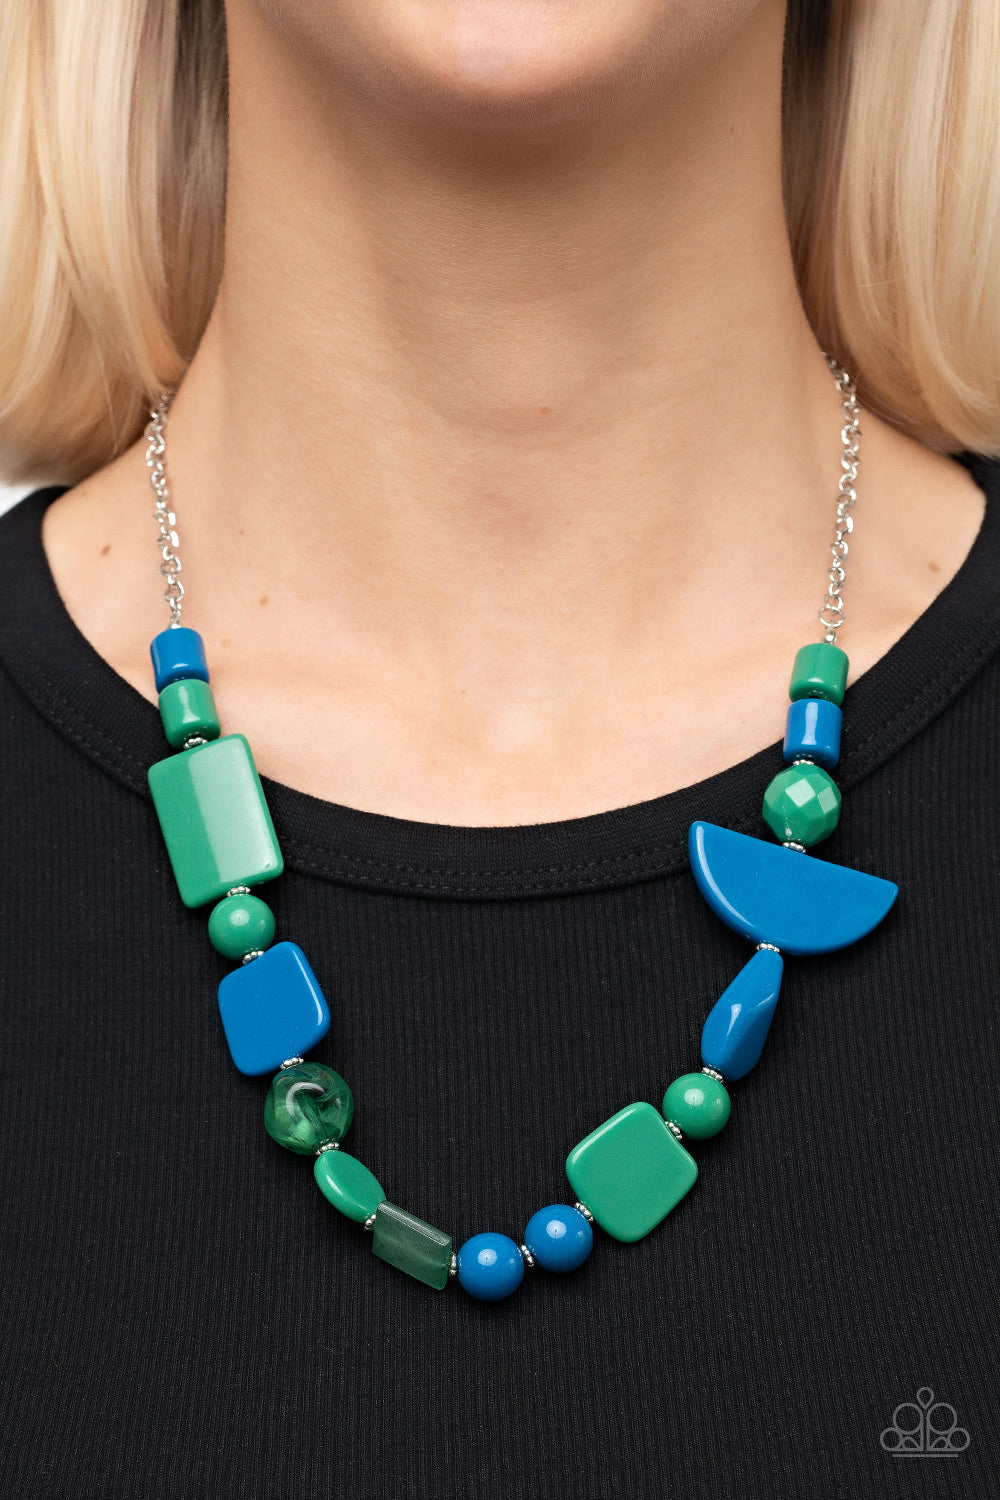 Tranquil Trendsetter - green - Paparazzi necklace